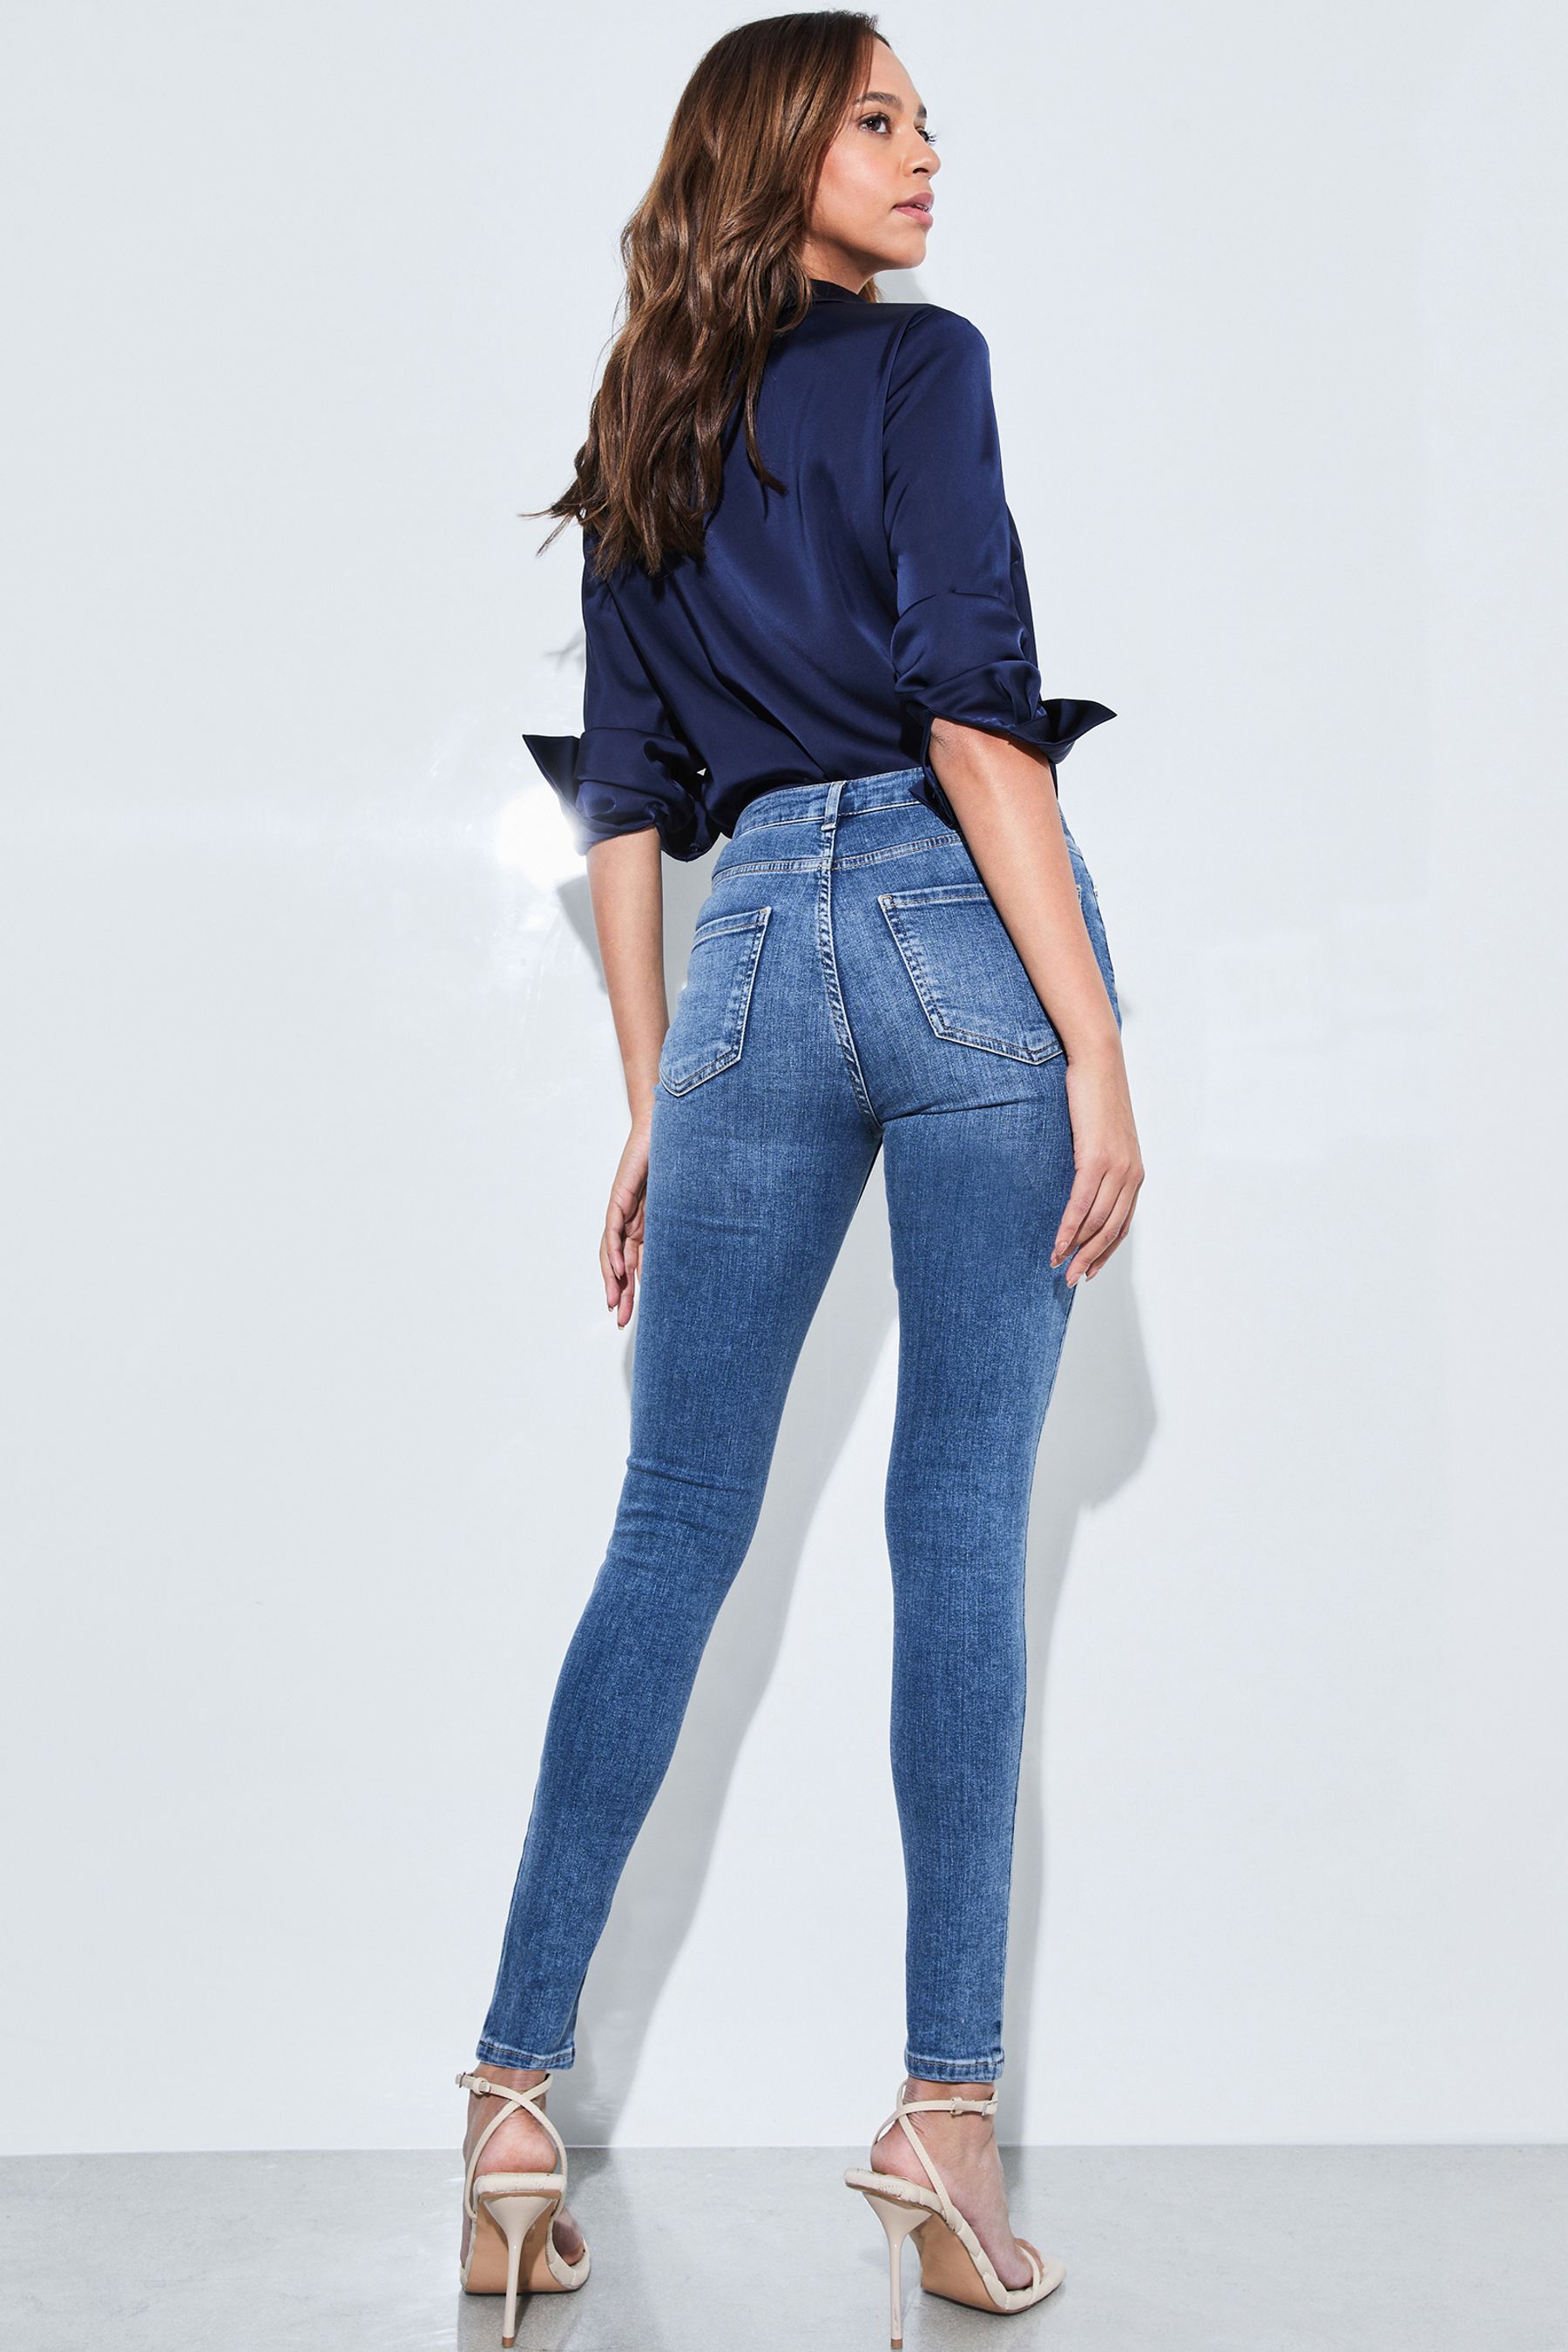 Buy Lipsy Authentic Blue Mid Rise Skinny Kate Jeans from the Next UK ...